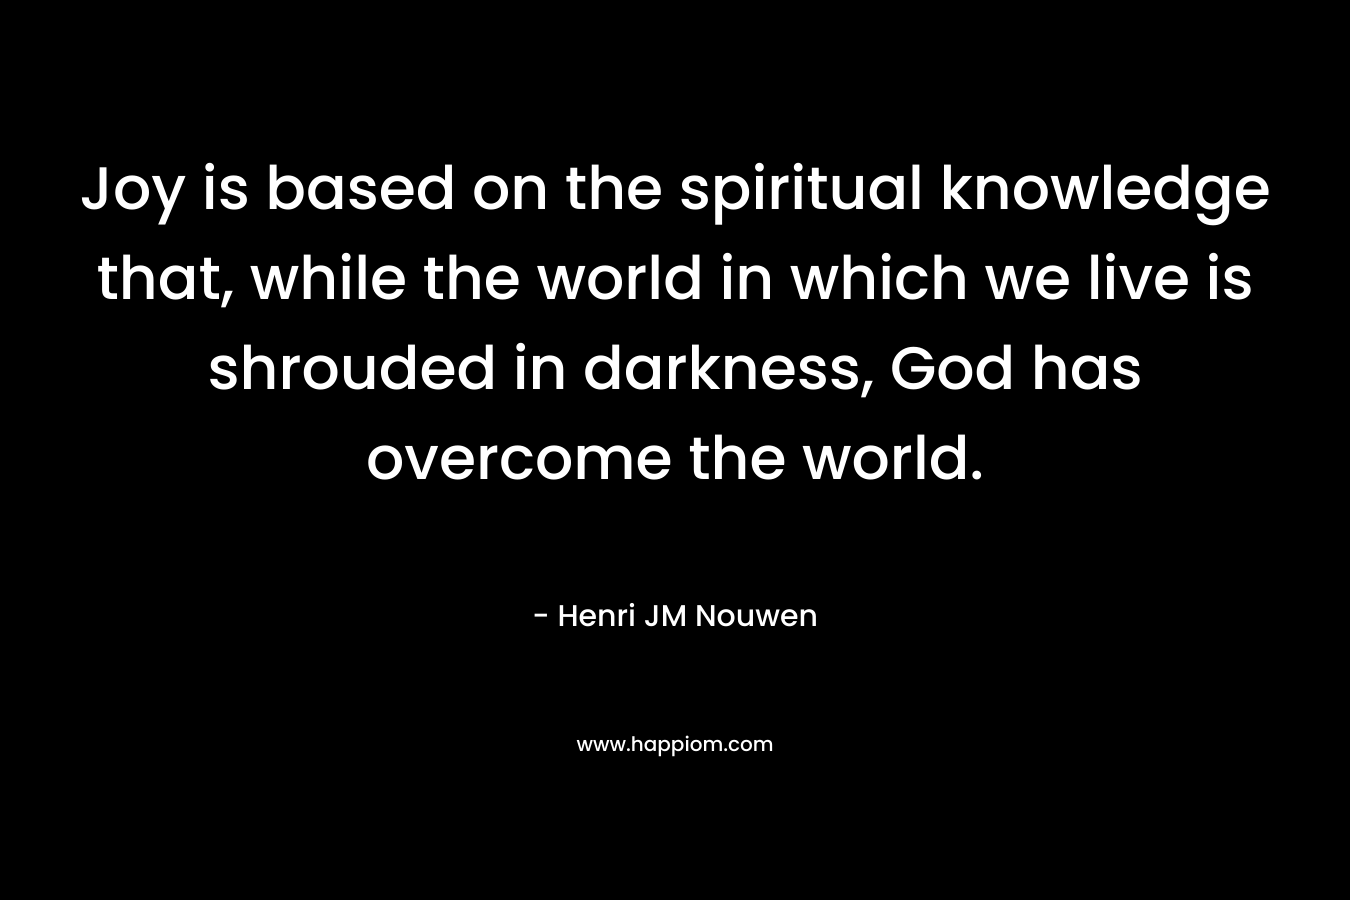 Joy is based on the spiritual knowledge that, while the world in which we live is shrouded in darkness, God has overcome the world.